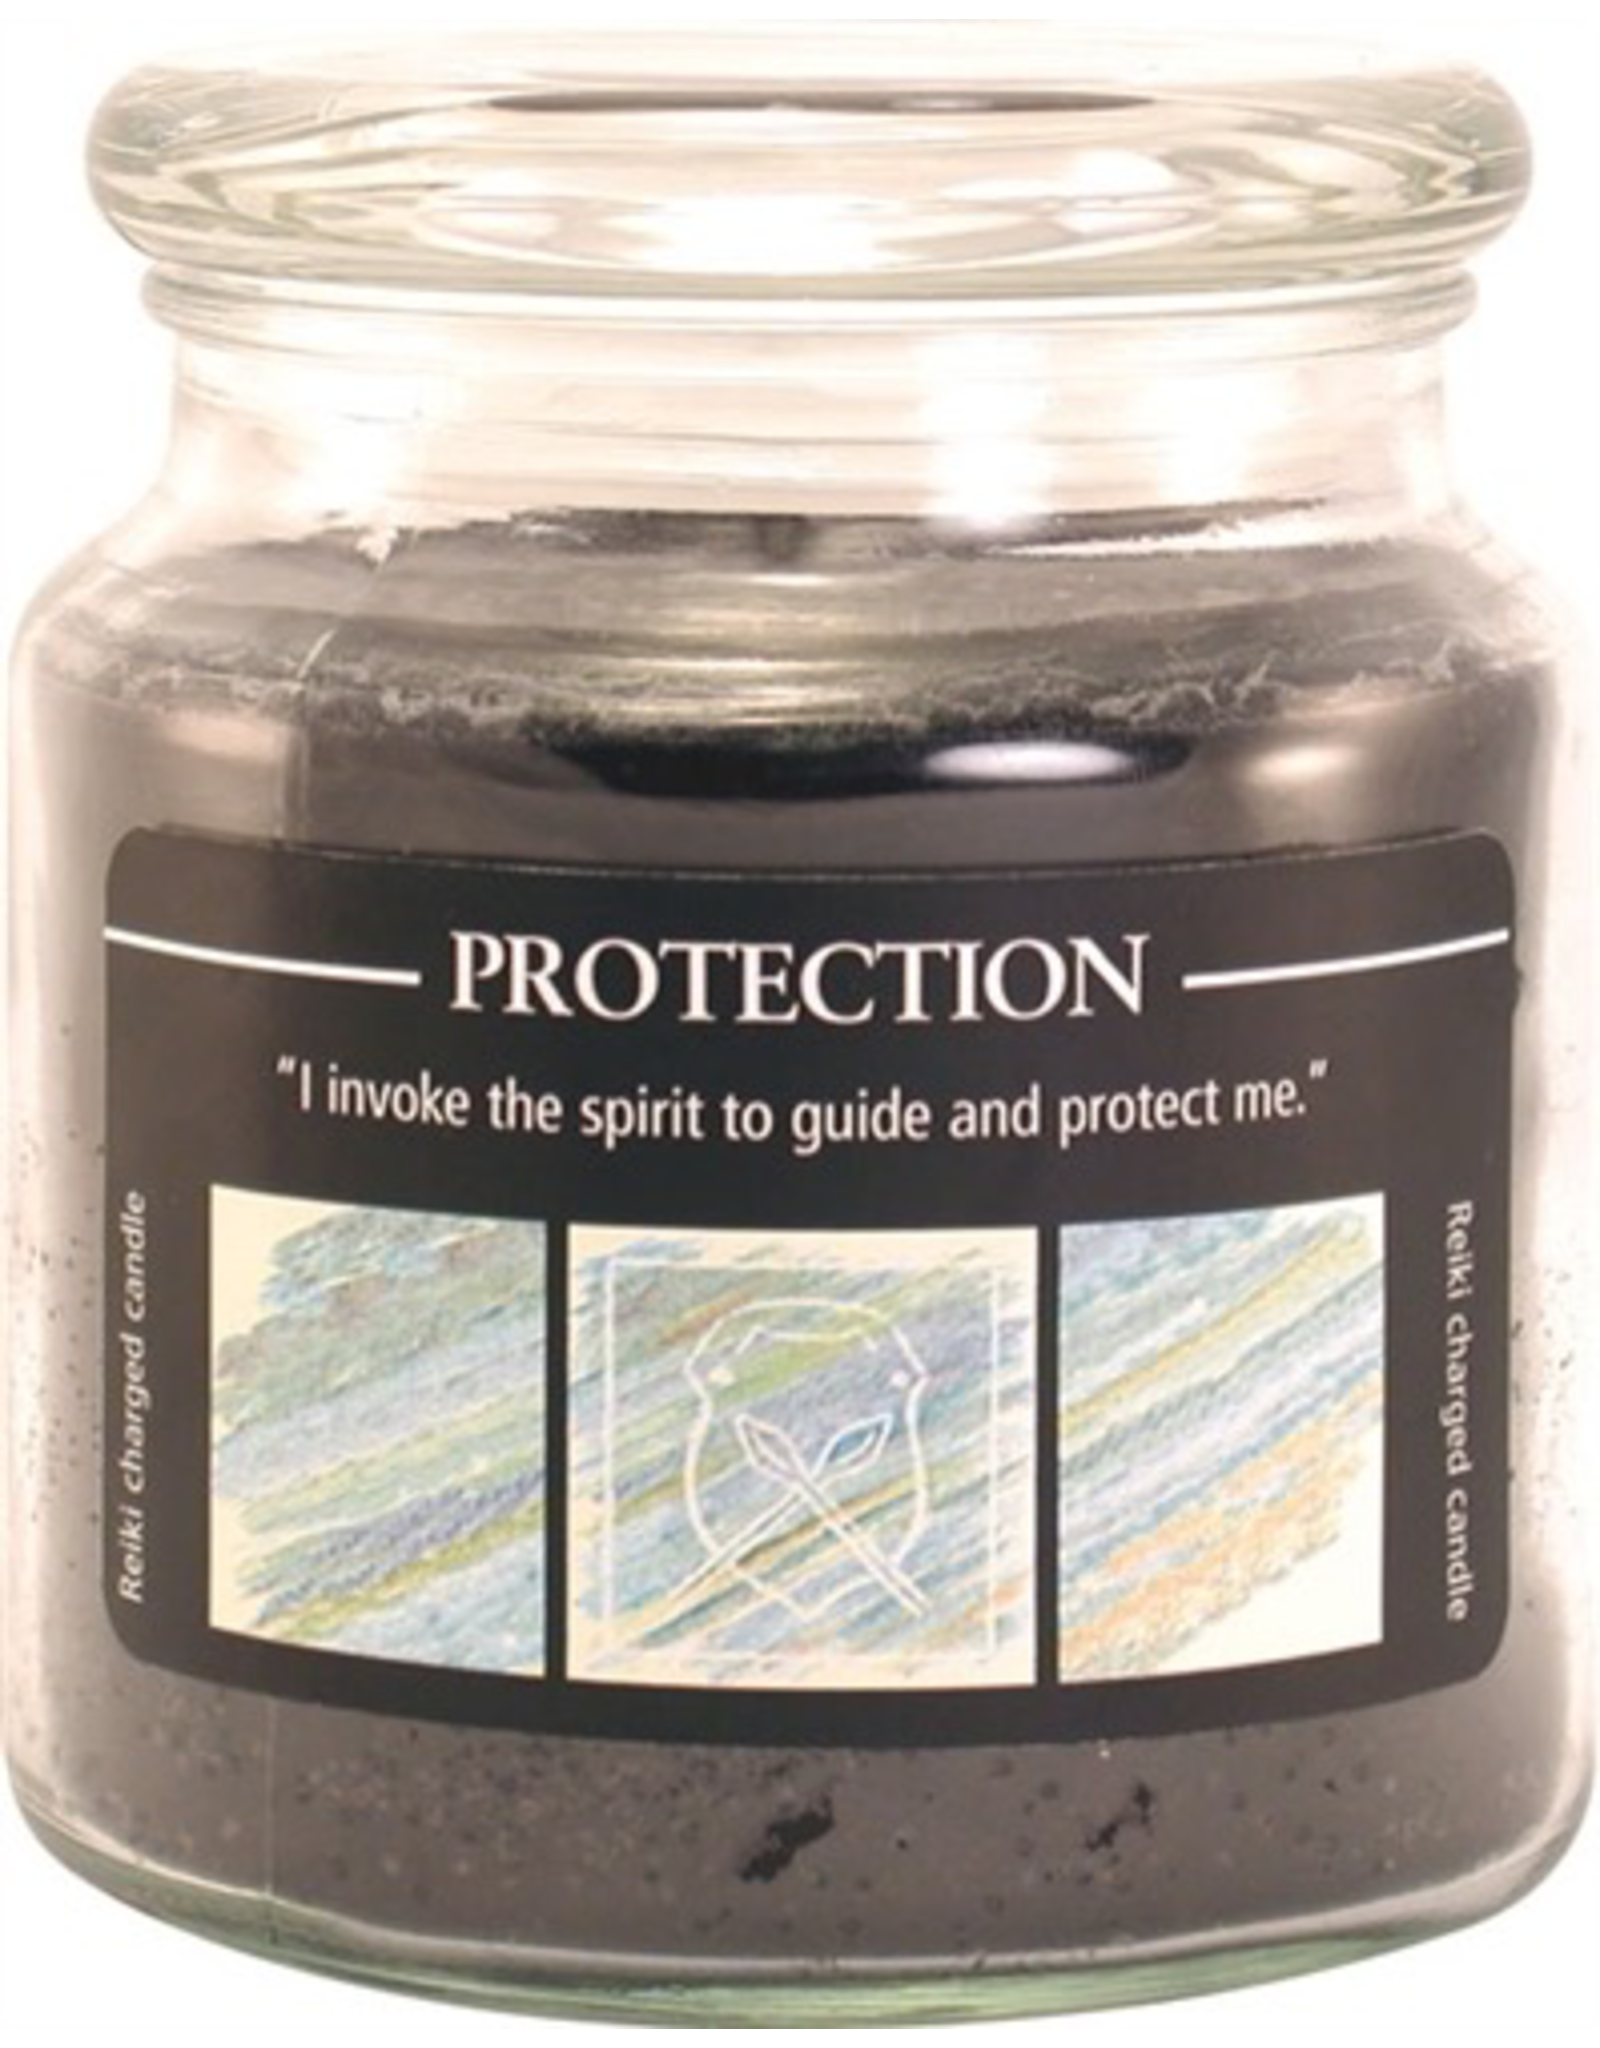 Crystal Journey Jar Candle-Protection